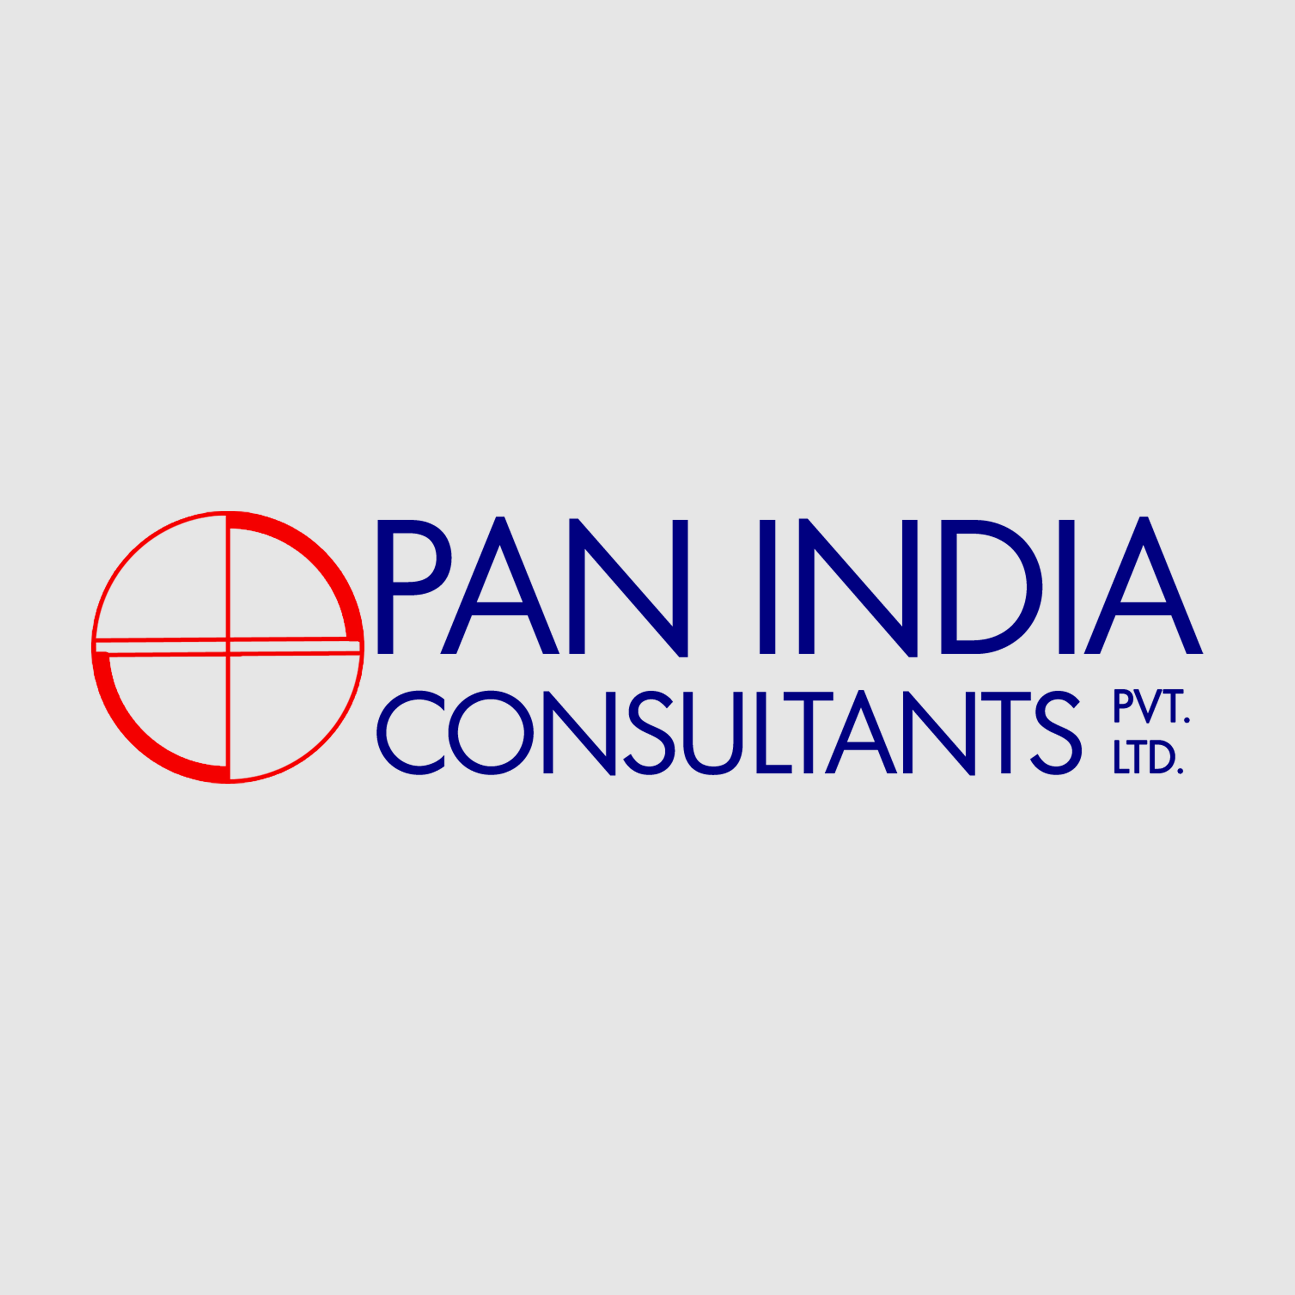 SubC Imaging Expands to India with Pan India Group!